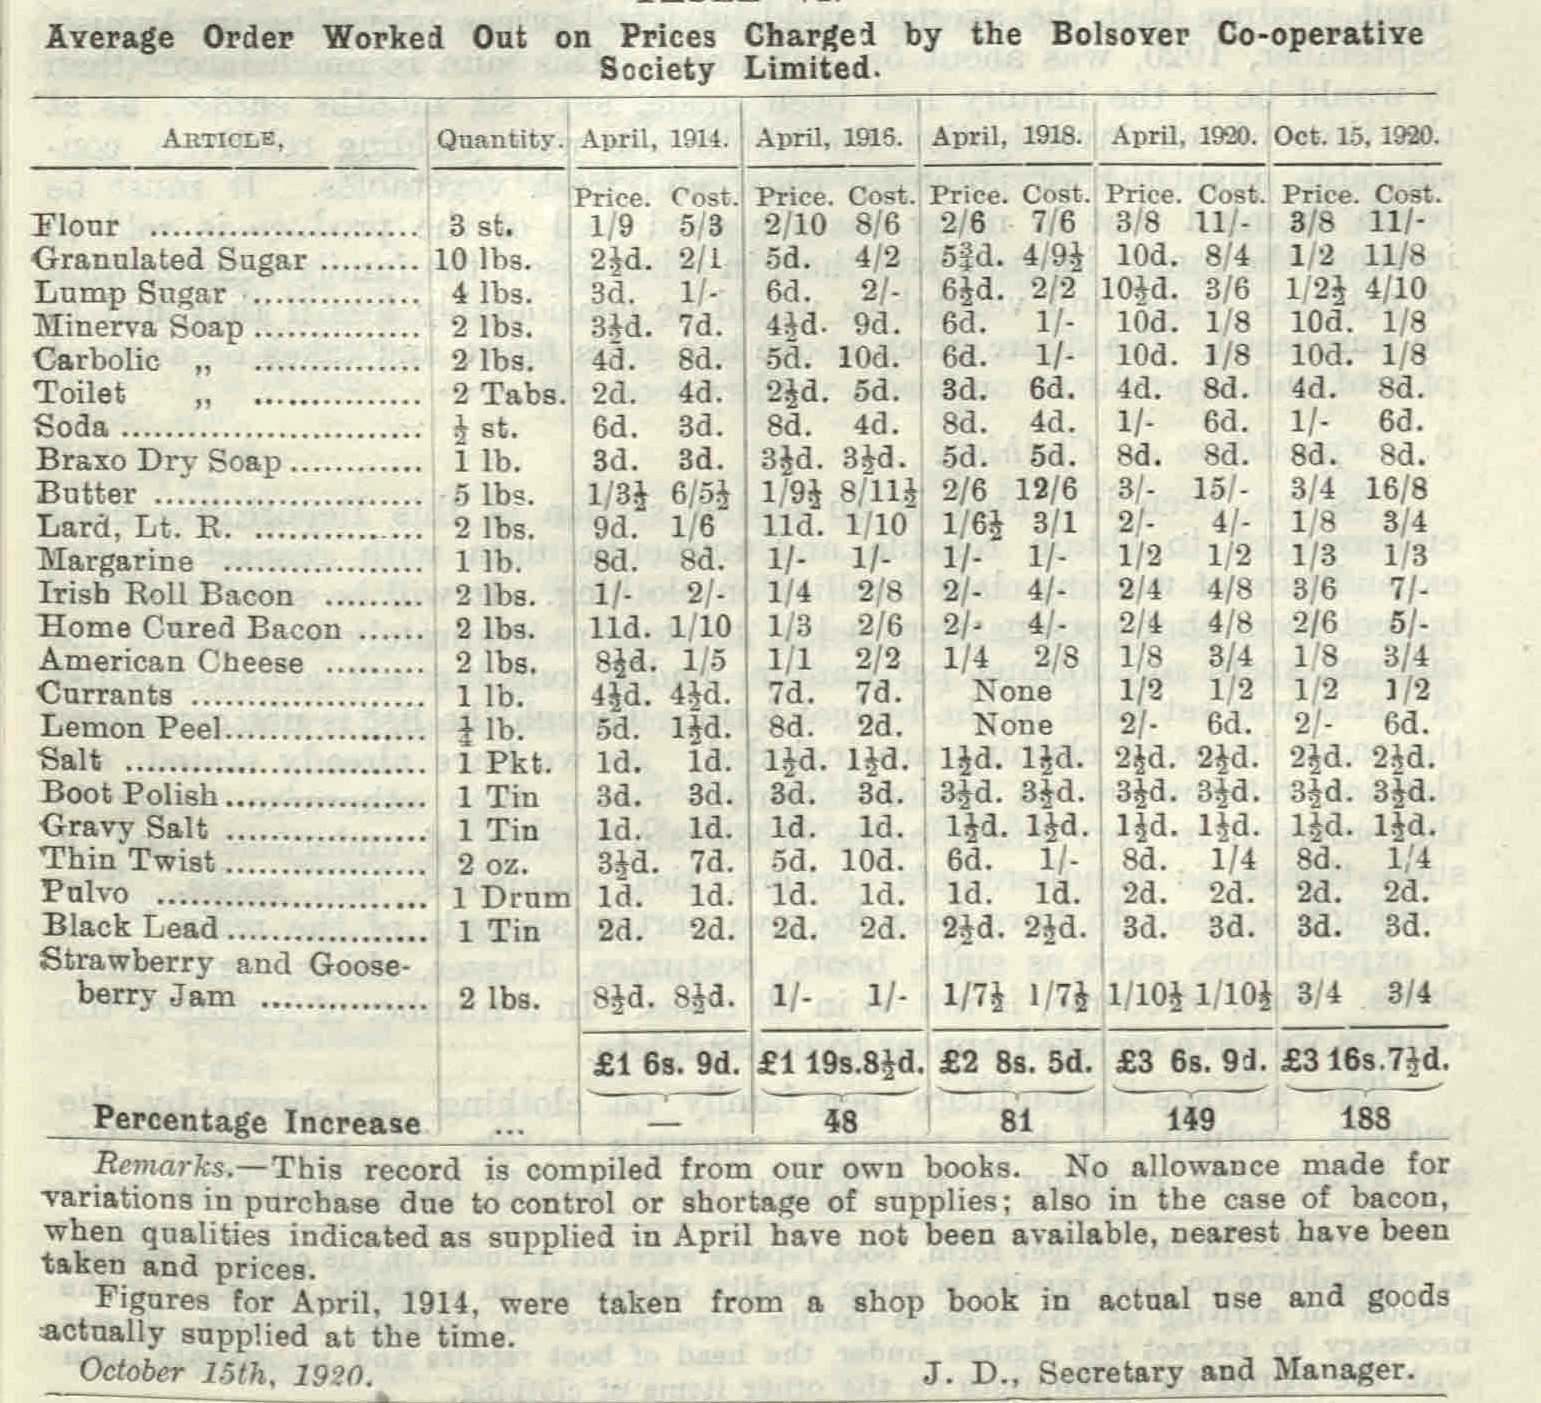 Information about the comparative costs of groceries purchased in 1914, 1916, 1918 and 1920